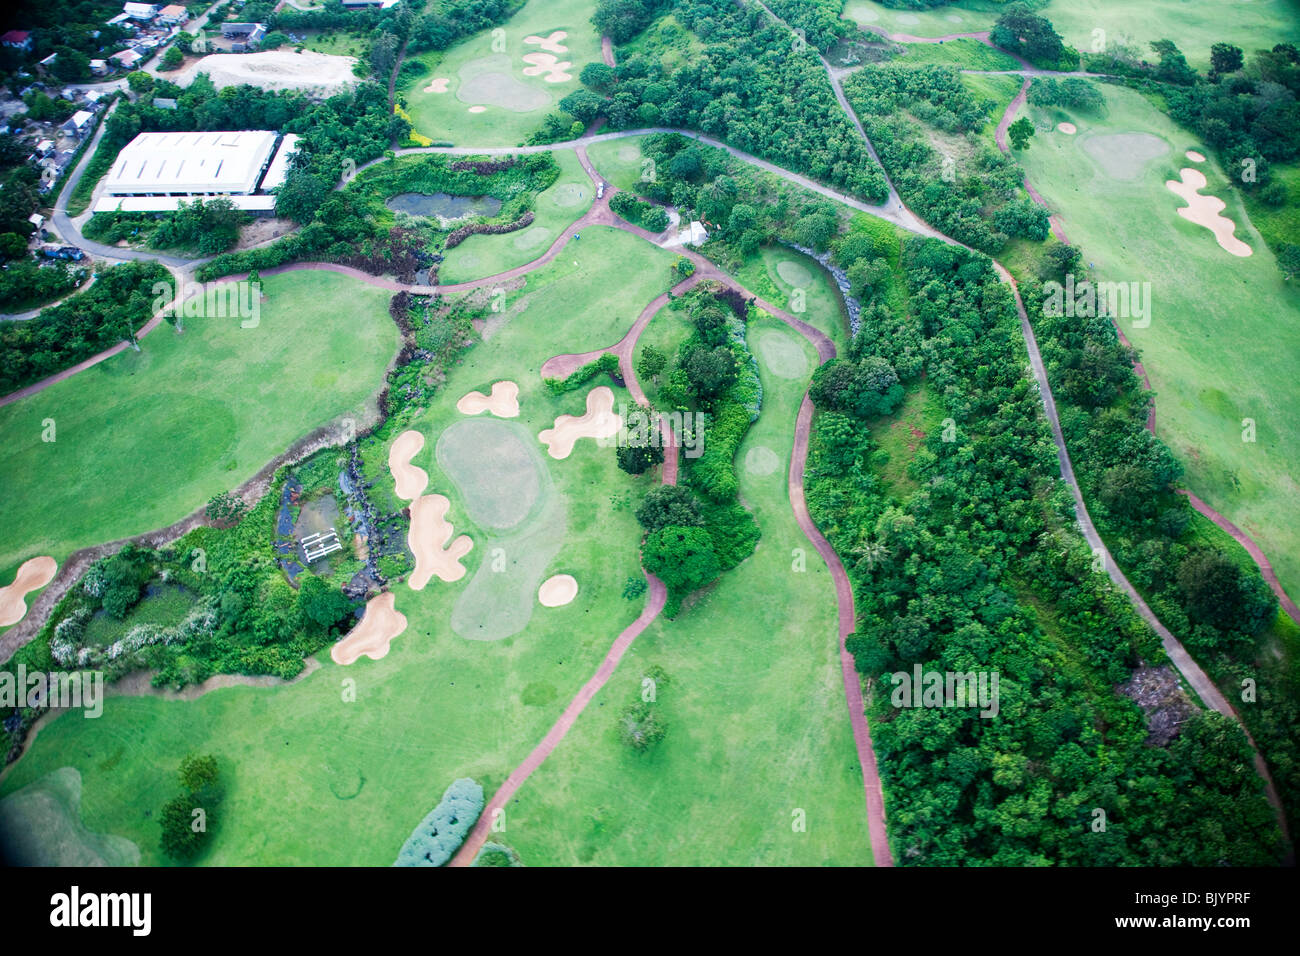 Aerial view of a golf course in Boracay Islands in Central Philippines Stock Photo